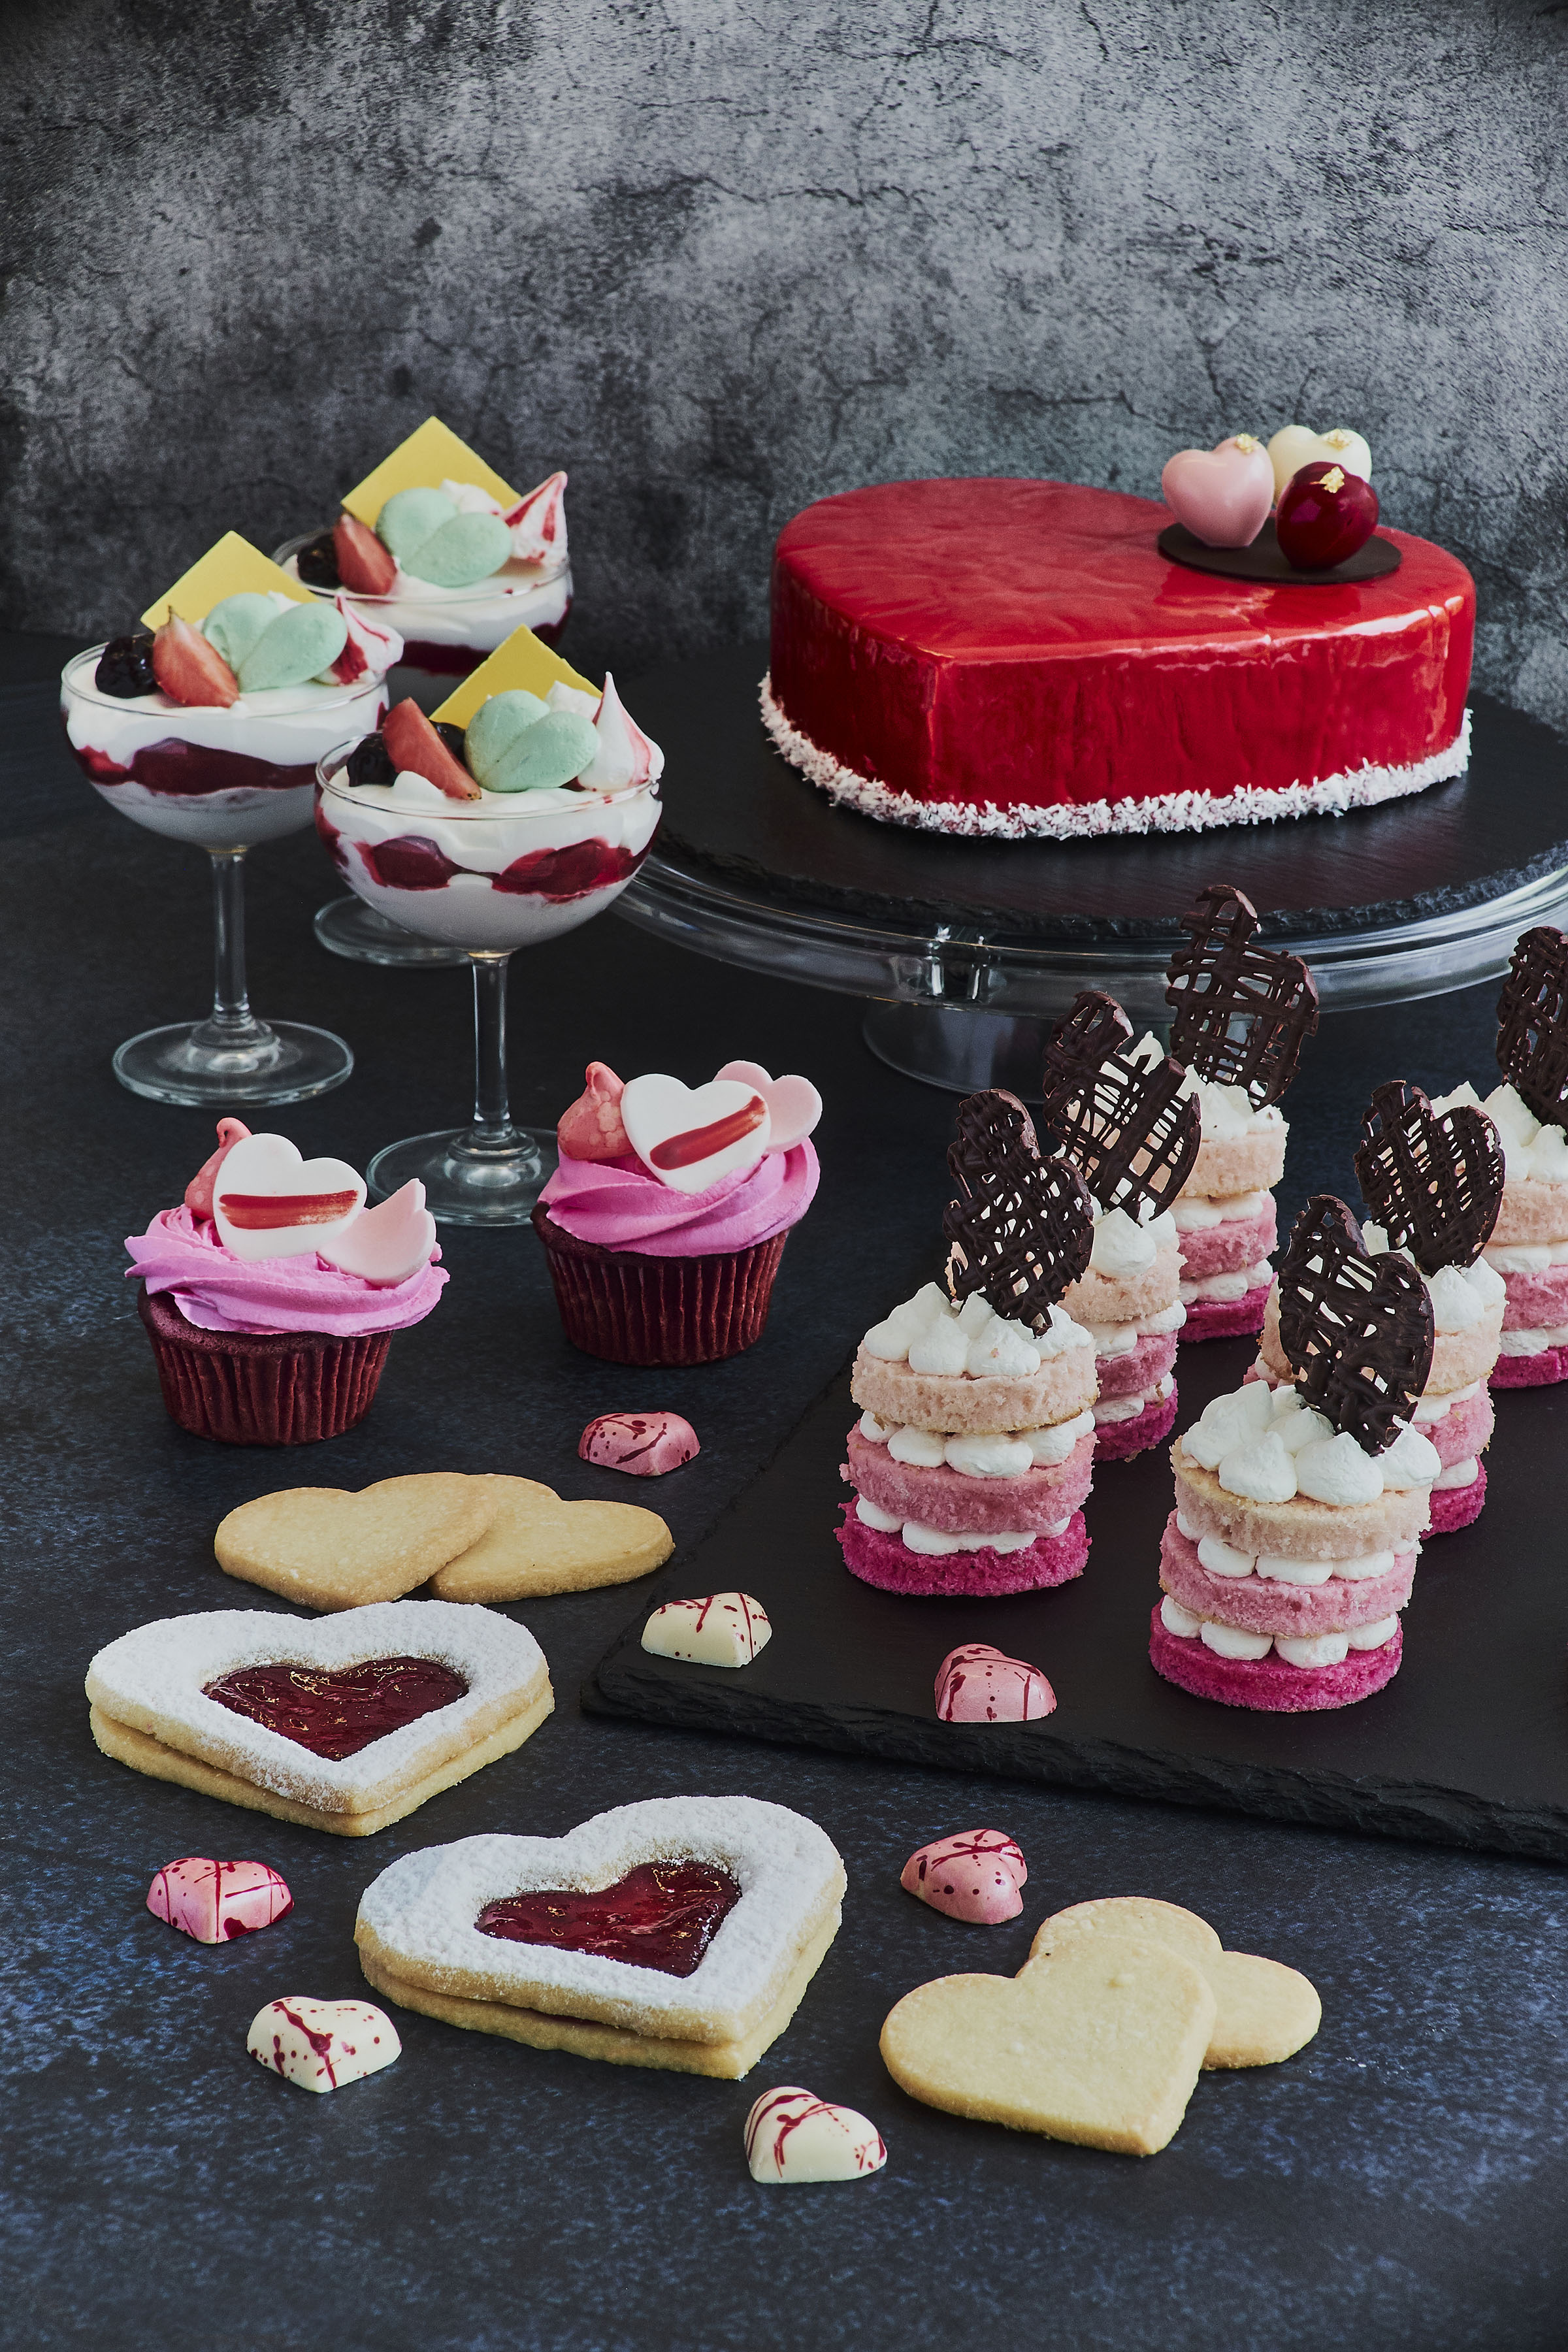 New World Makati Hotel's Valentine's Day buffet desserts at Cafe 1228.